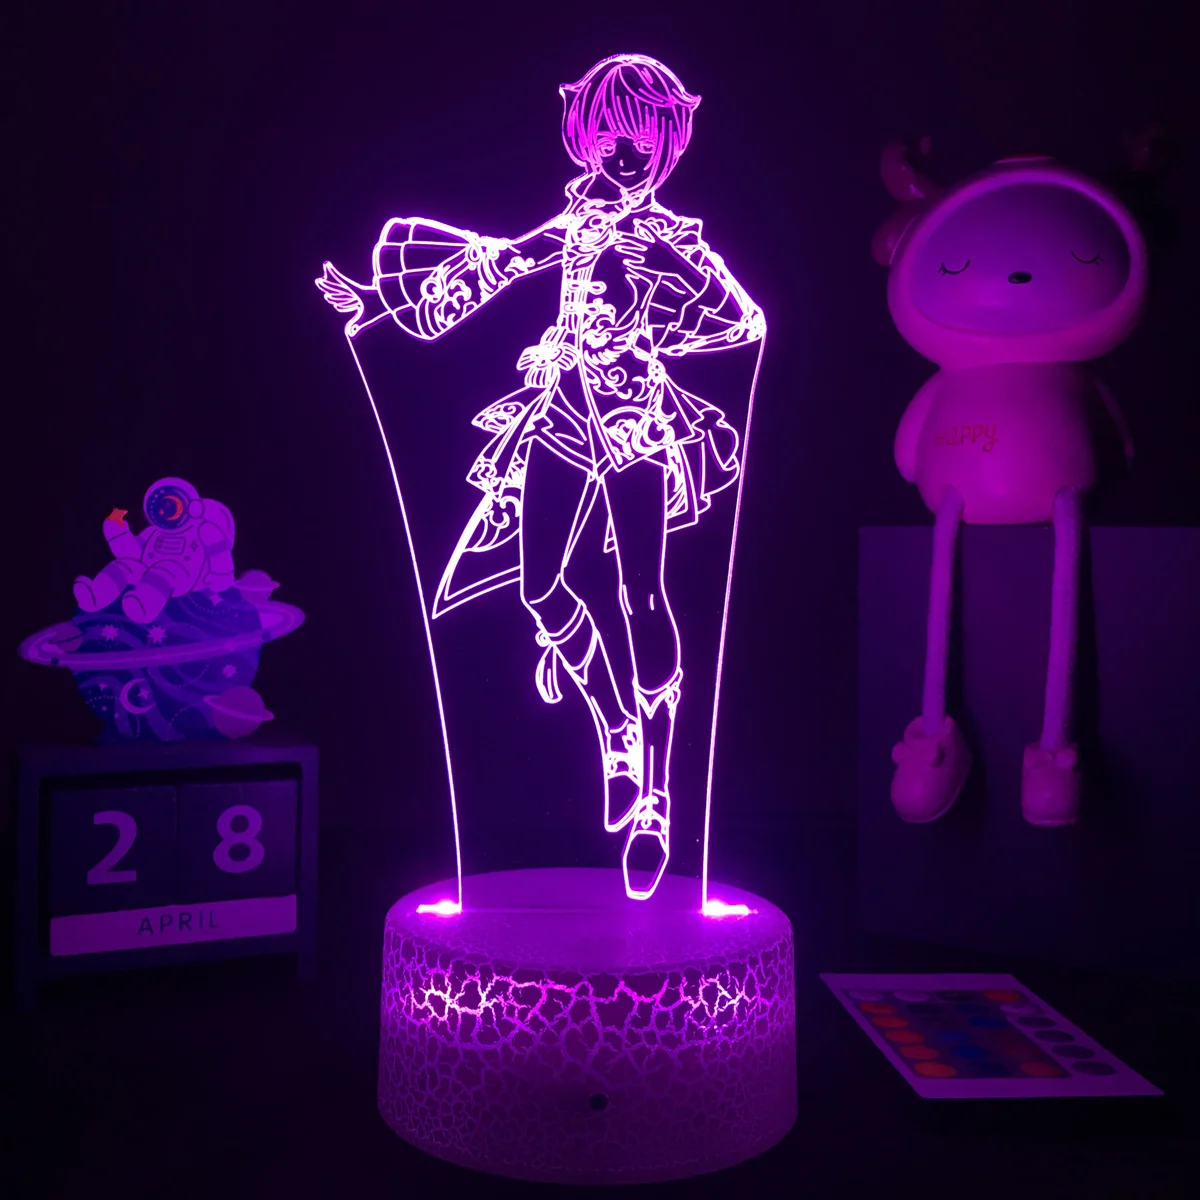 best night light Genshin Impact 3D LED Nightlight Color Changing Usb Battery Powered Usb Lamp Ganyu Mona Game Figure For Room Decor Unique Gift mushroom night light Night Lights